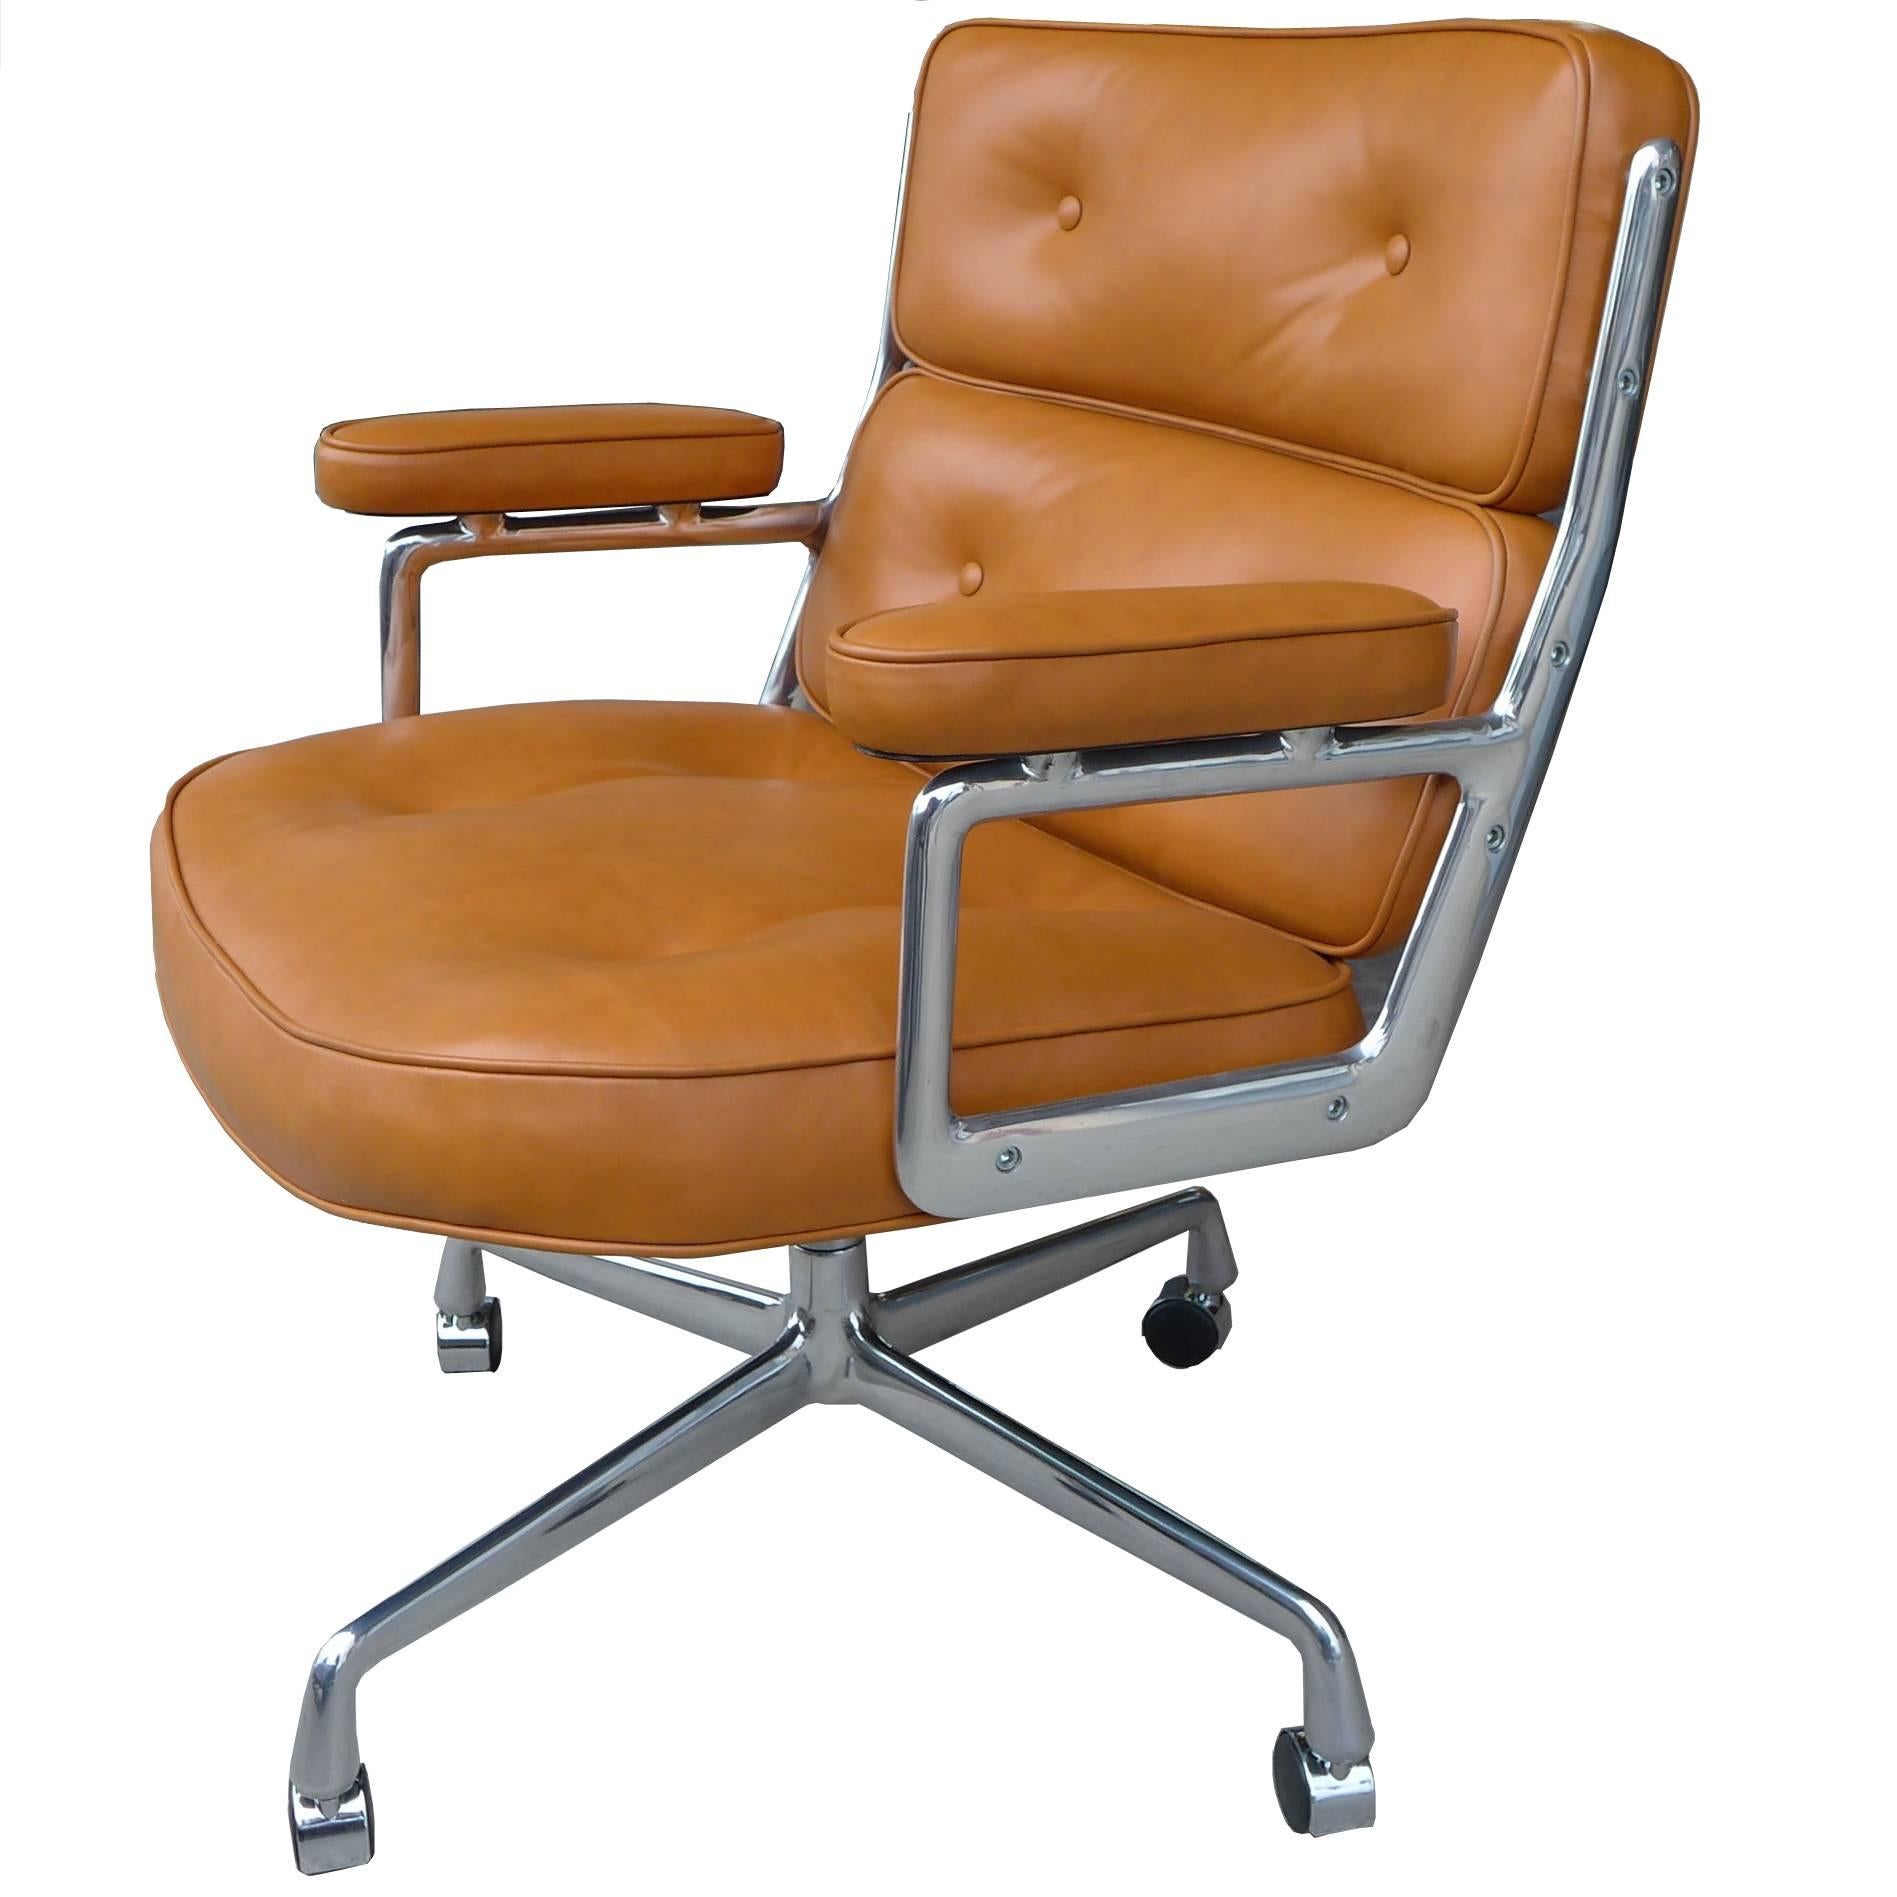 Rare Oversized Time Life Executive Office Chair in Butterscotch Leather